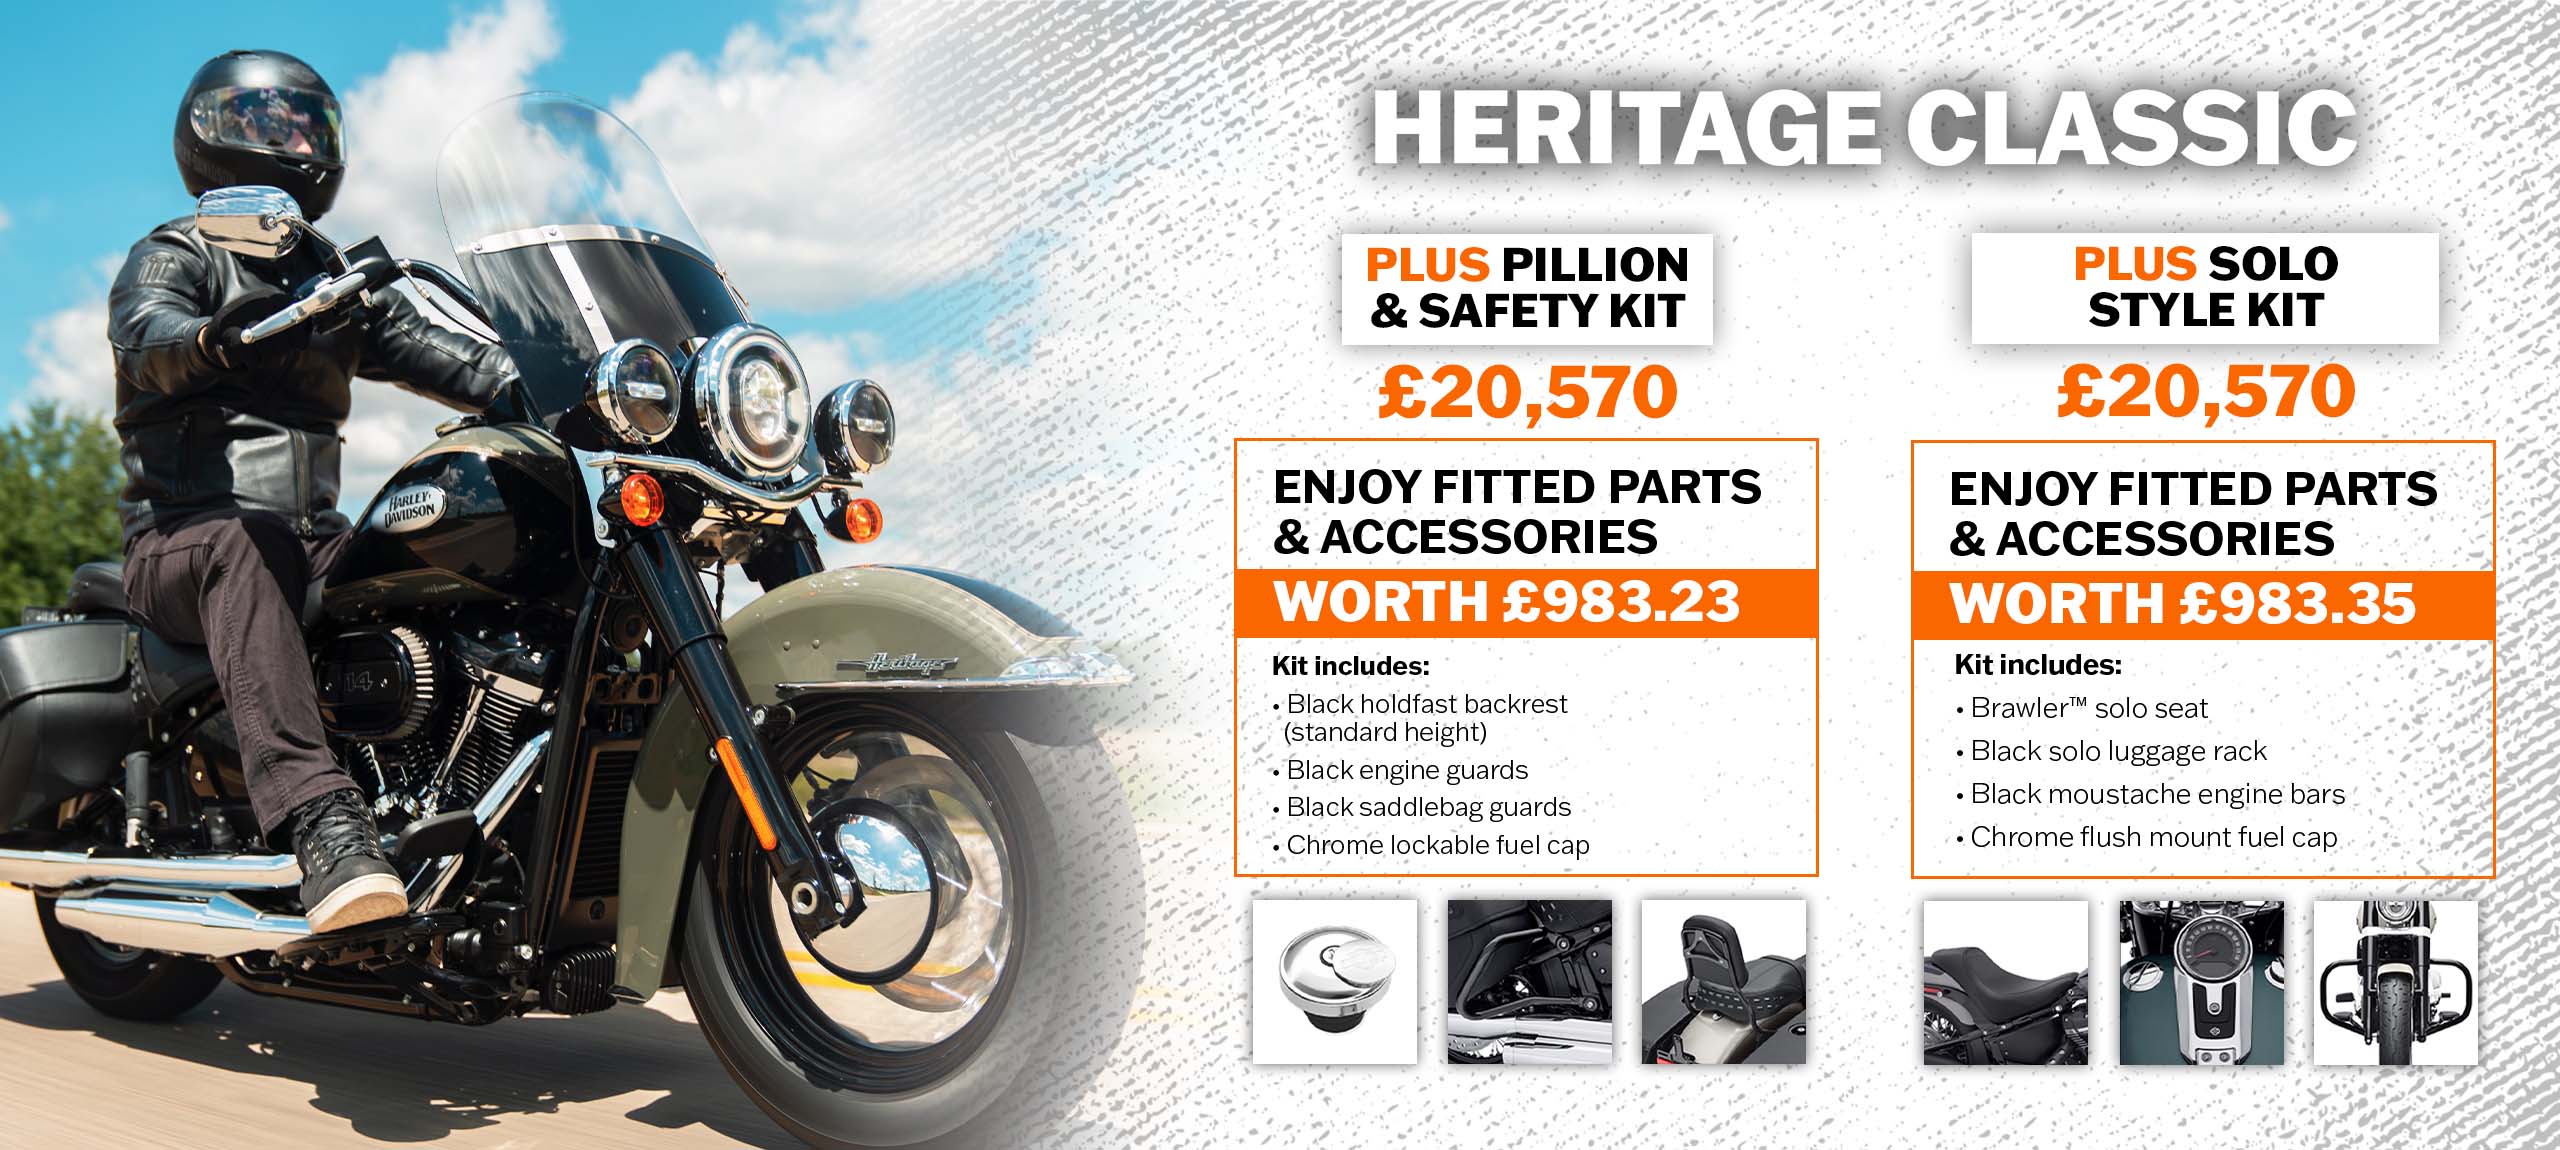 Harley-Davidson Heritage Classic Motorcycle Offer